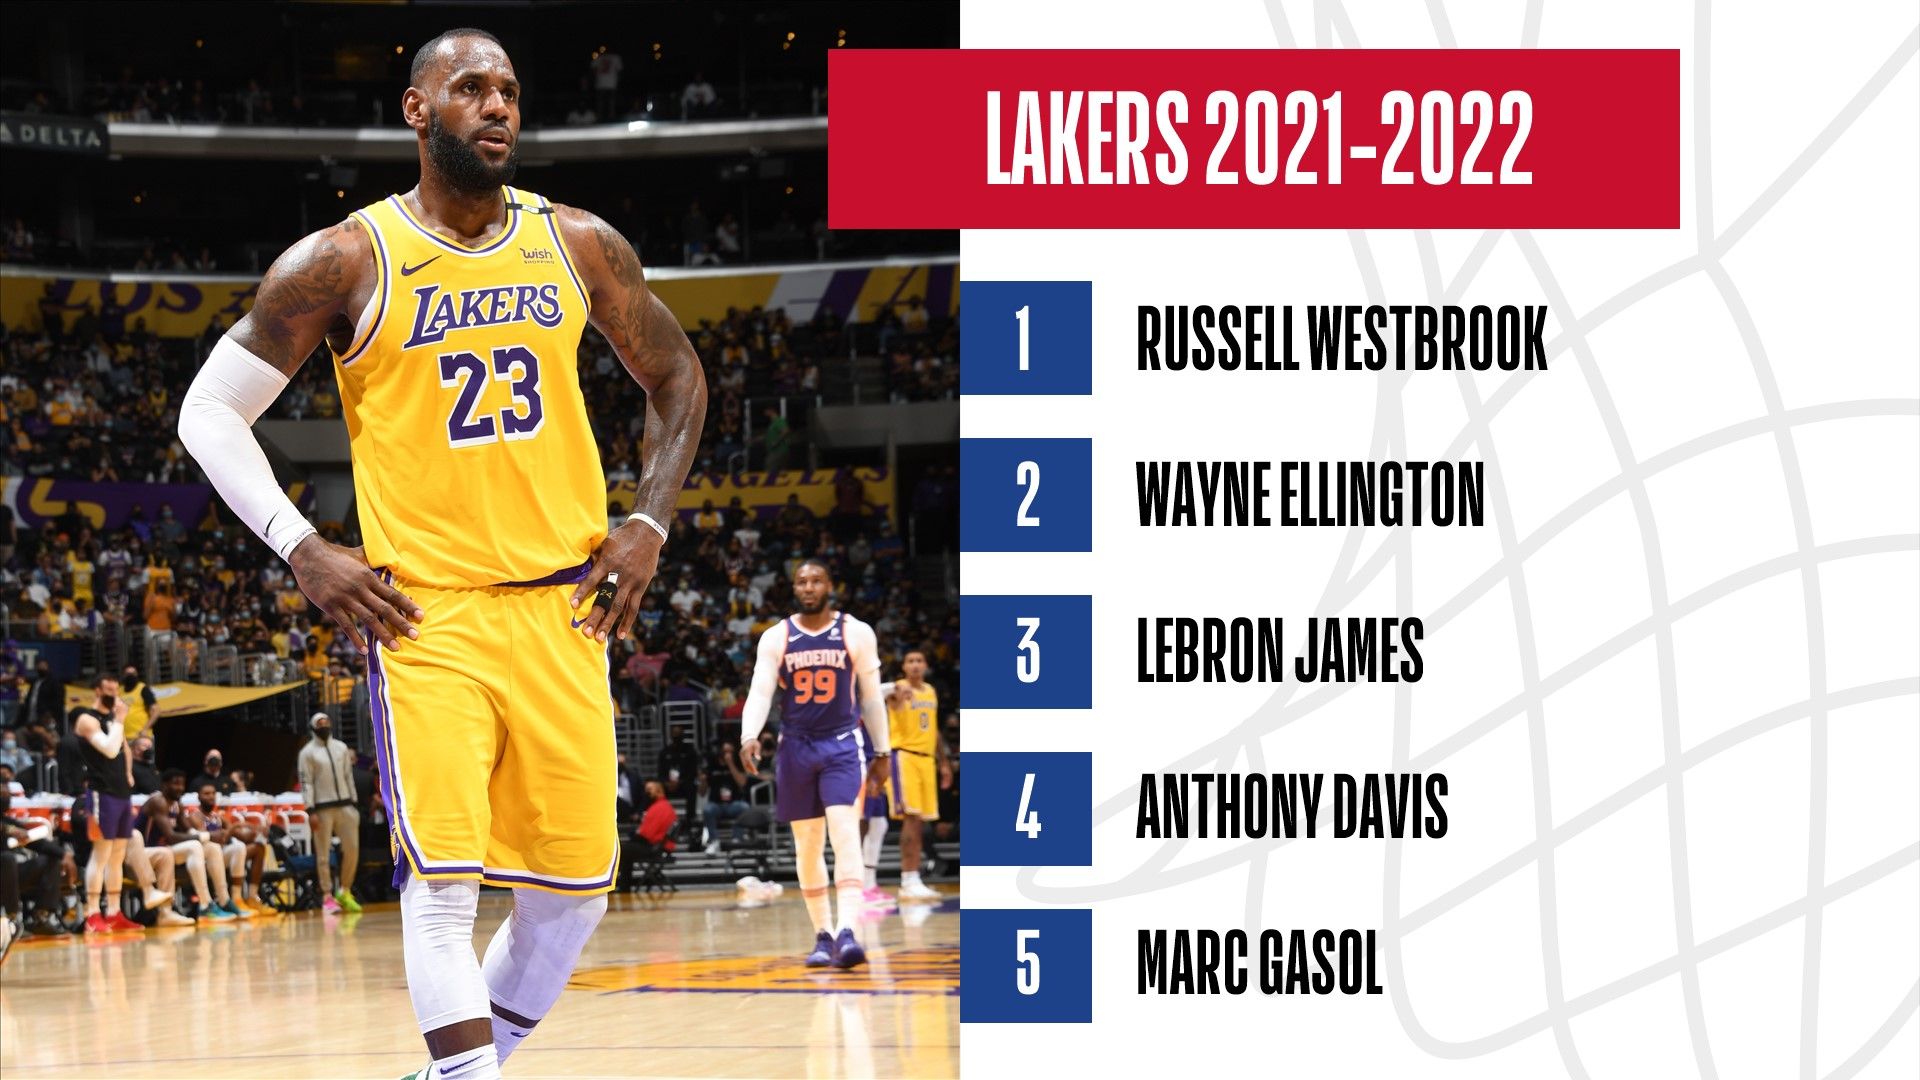 The Los Angeles Lakers Outlook For The NBA 2021 2022 Season After Their Movements